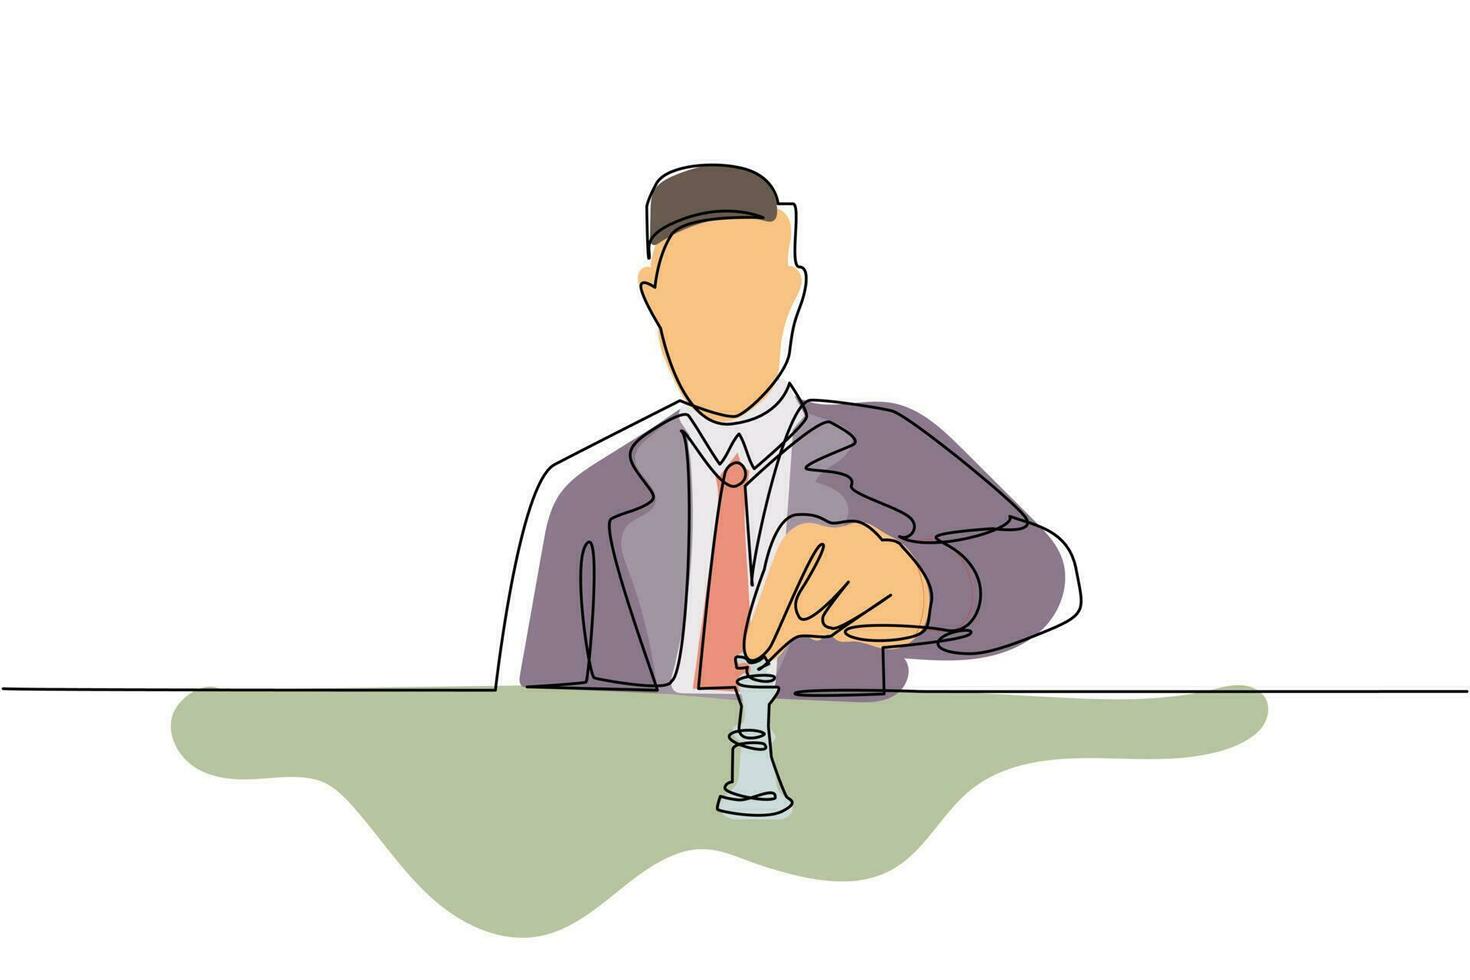 Continuous one line drawing strategy, leadership and management concept. Young smiling businessman sitting and moving chess figure alone feeling confident. Single line draw design vector illustration